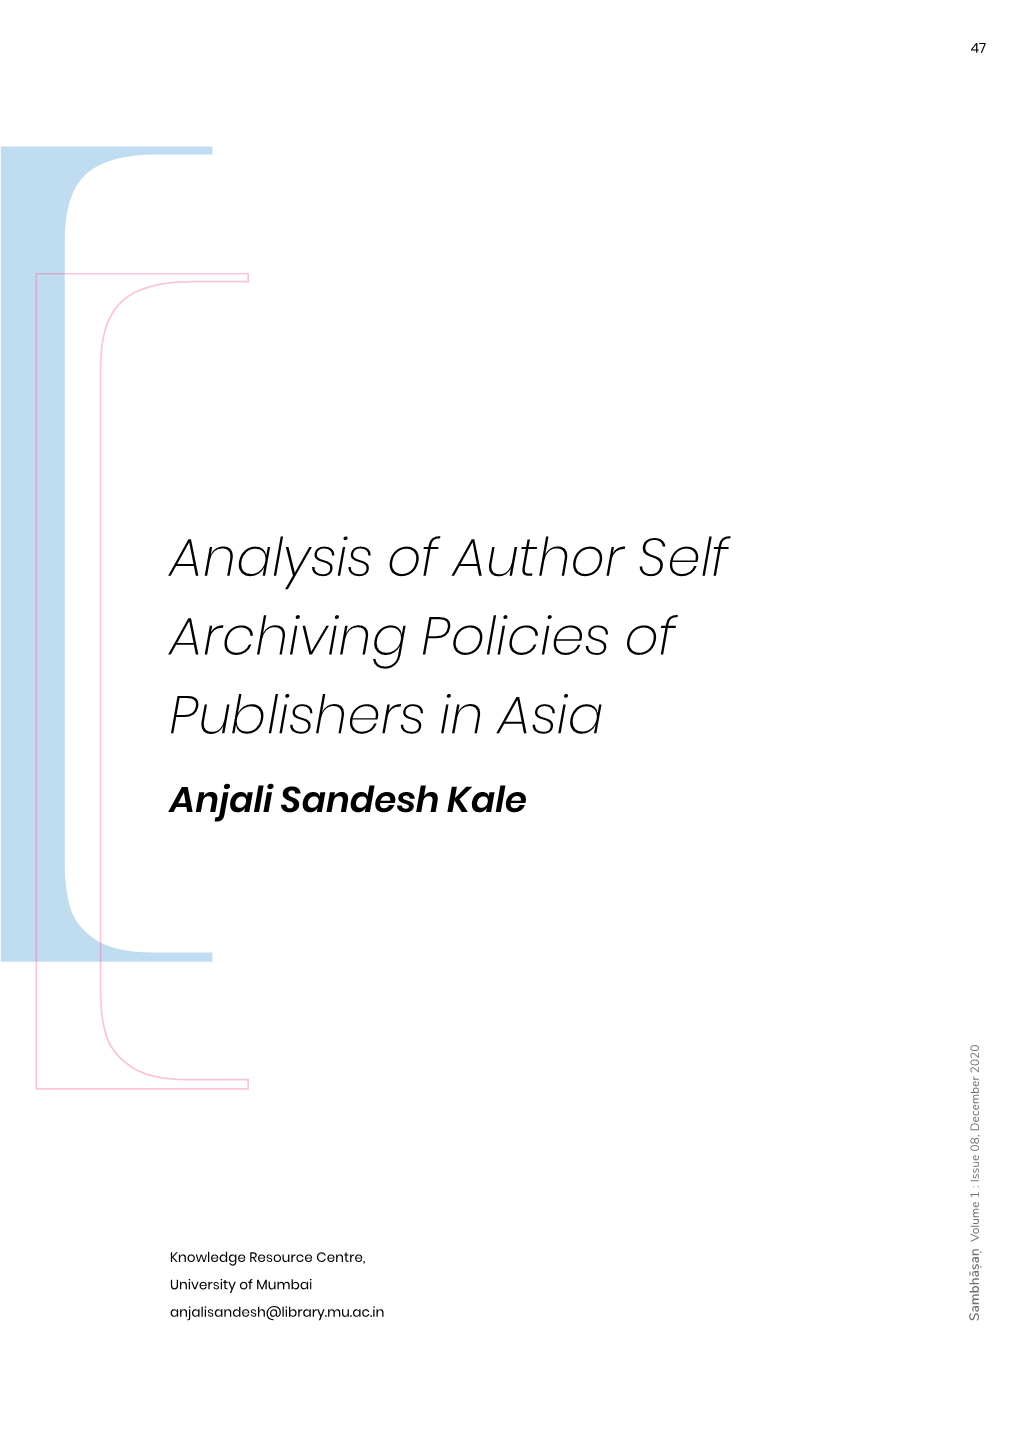 Analysis of Author Self Archiving Policies of Publishers in Asia